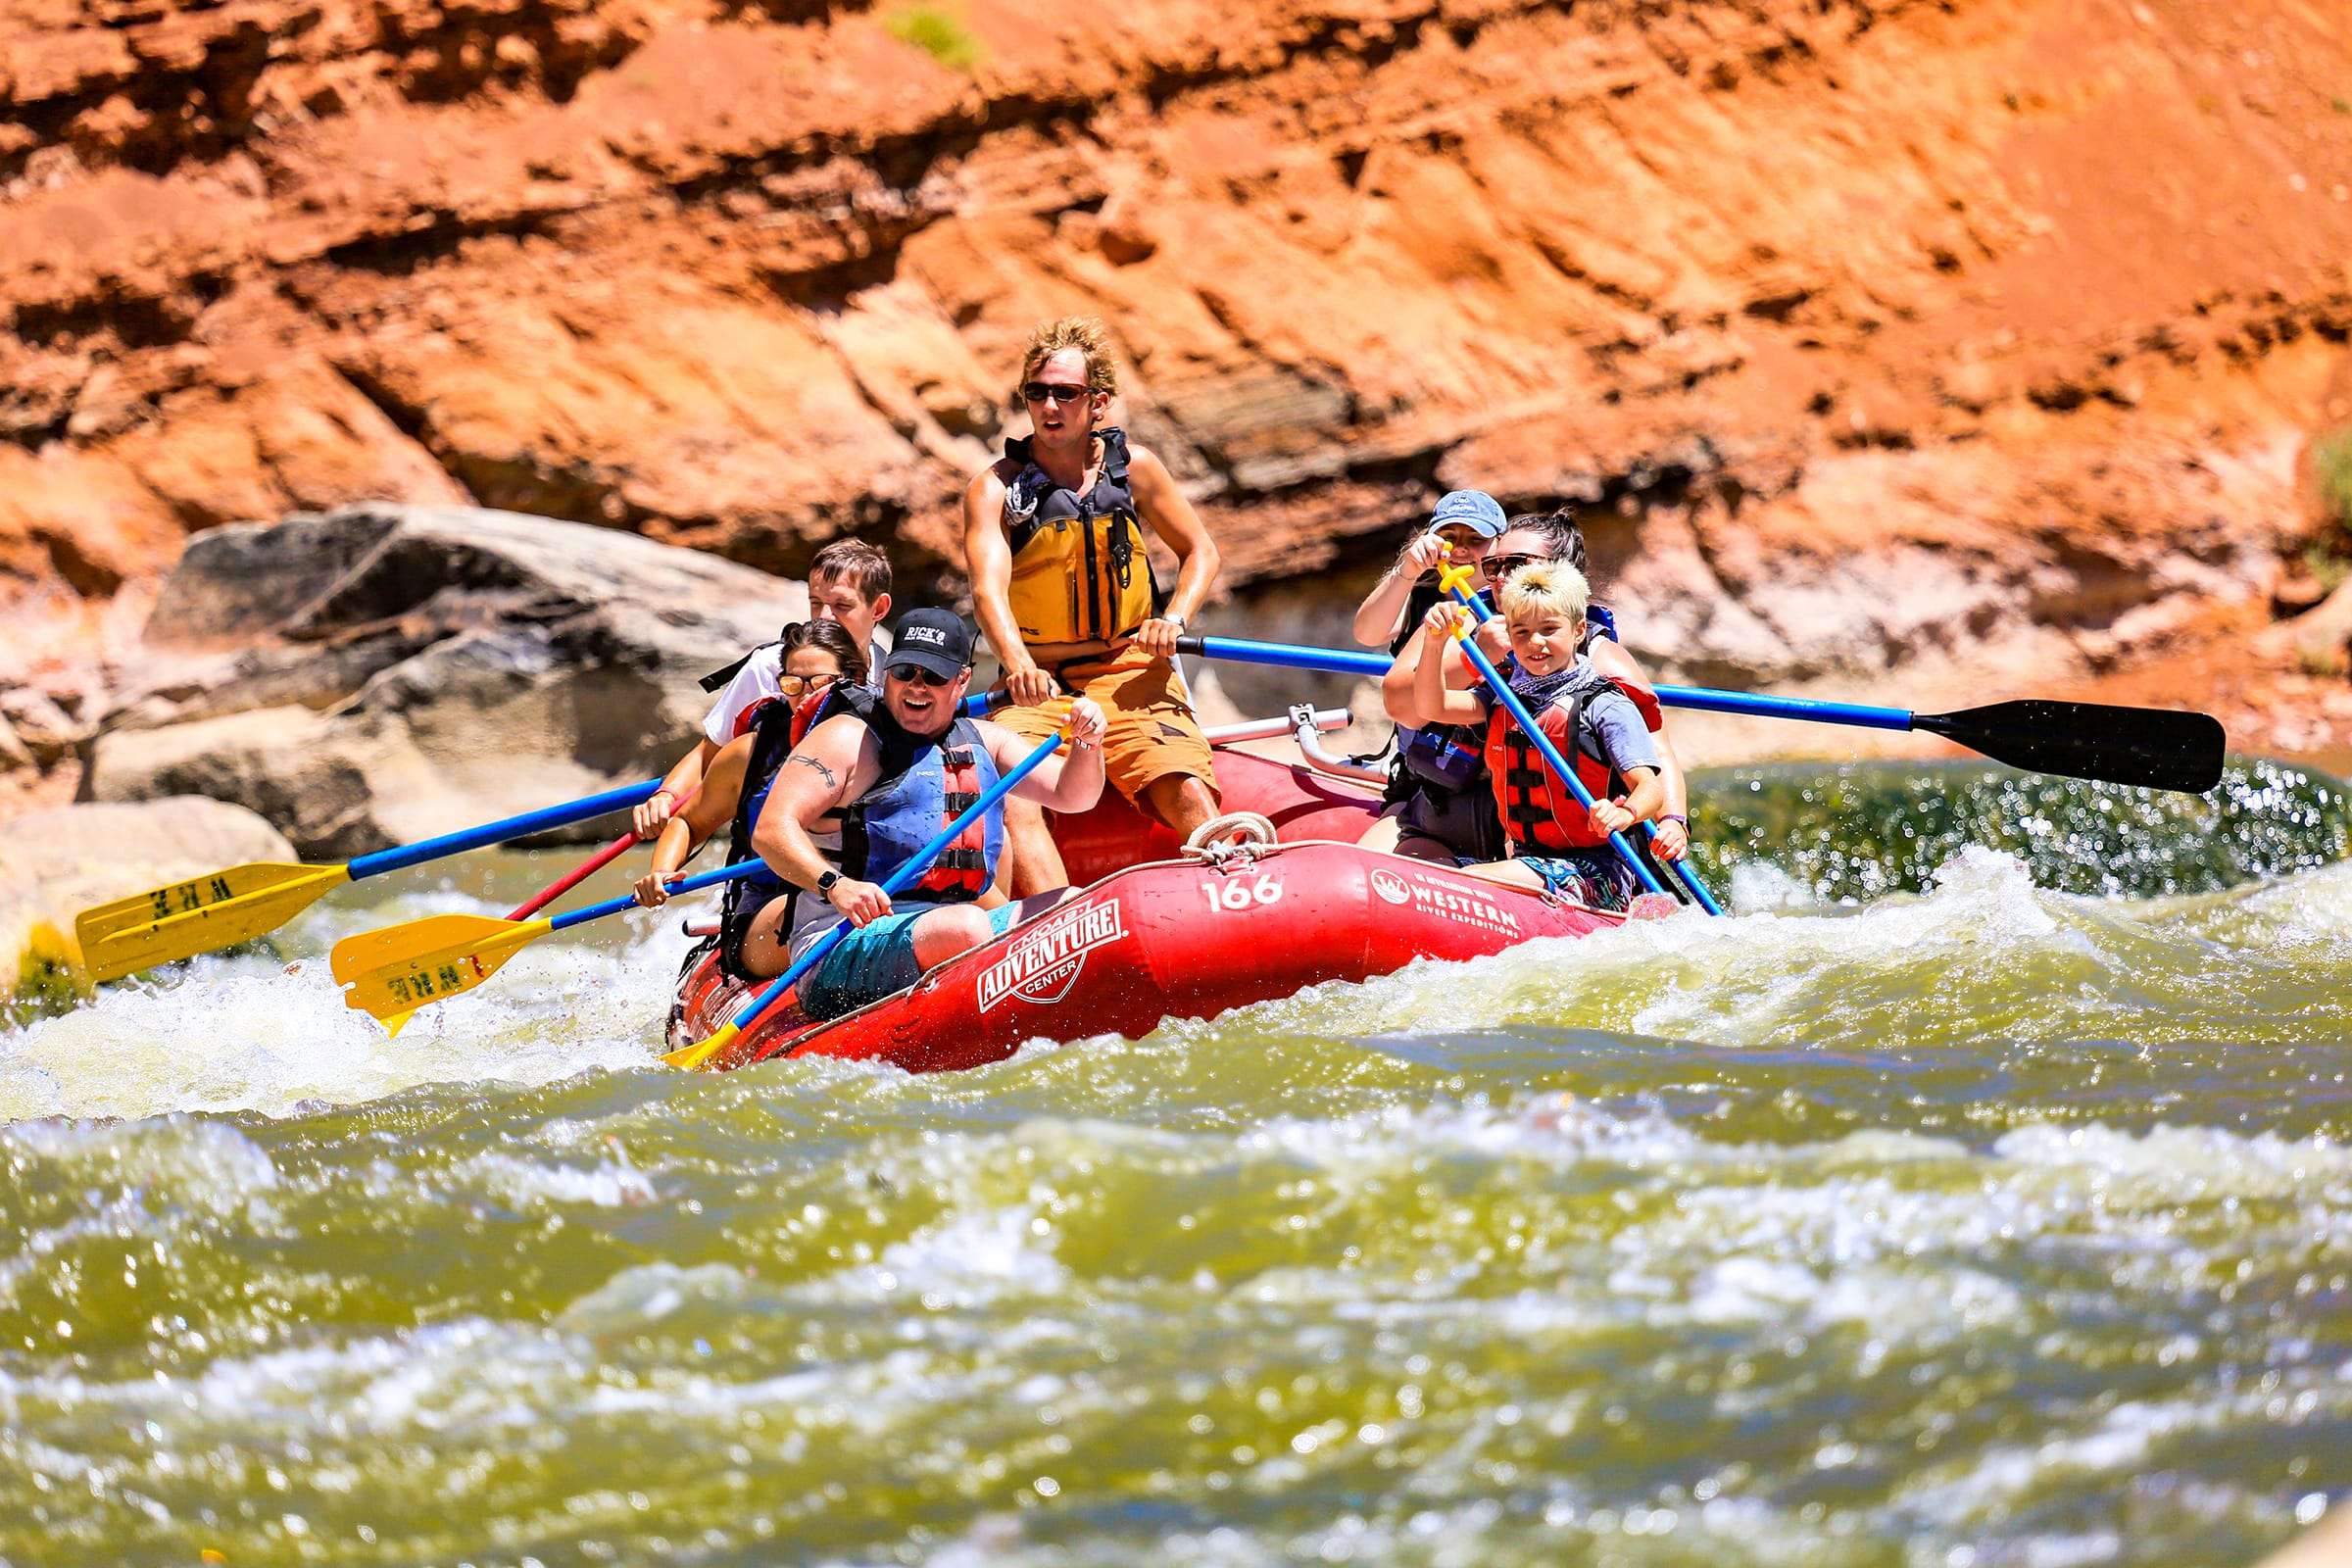 Moab Rafting Tour - Paddleboat on the Colorado River